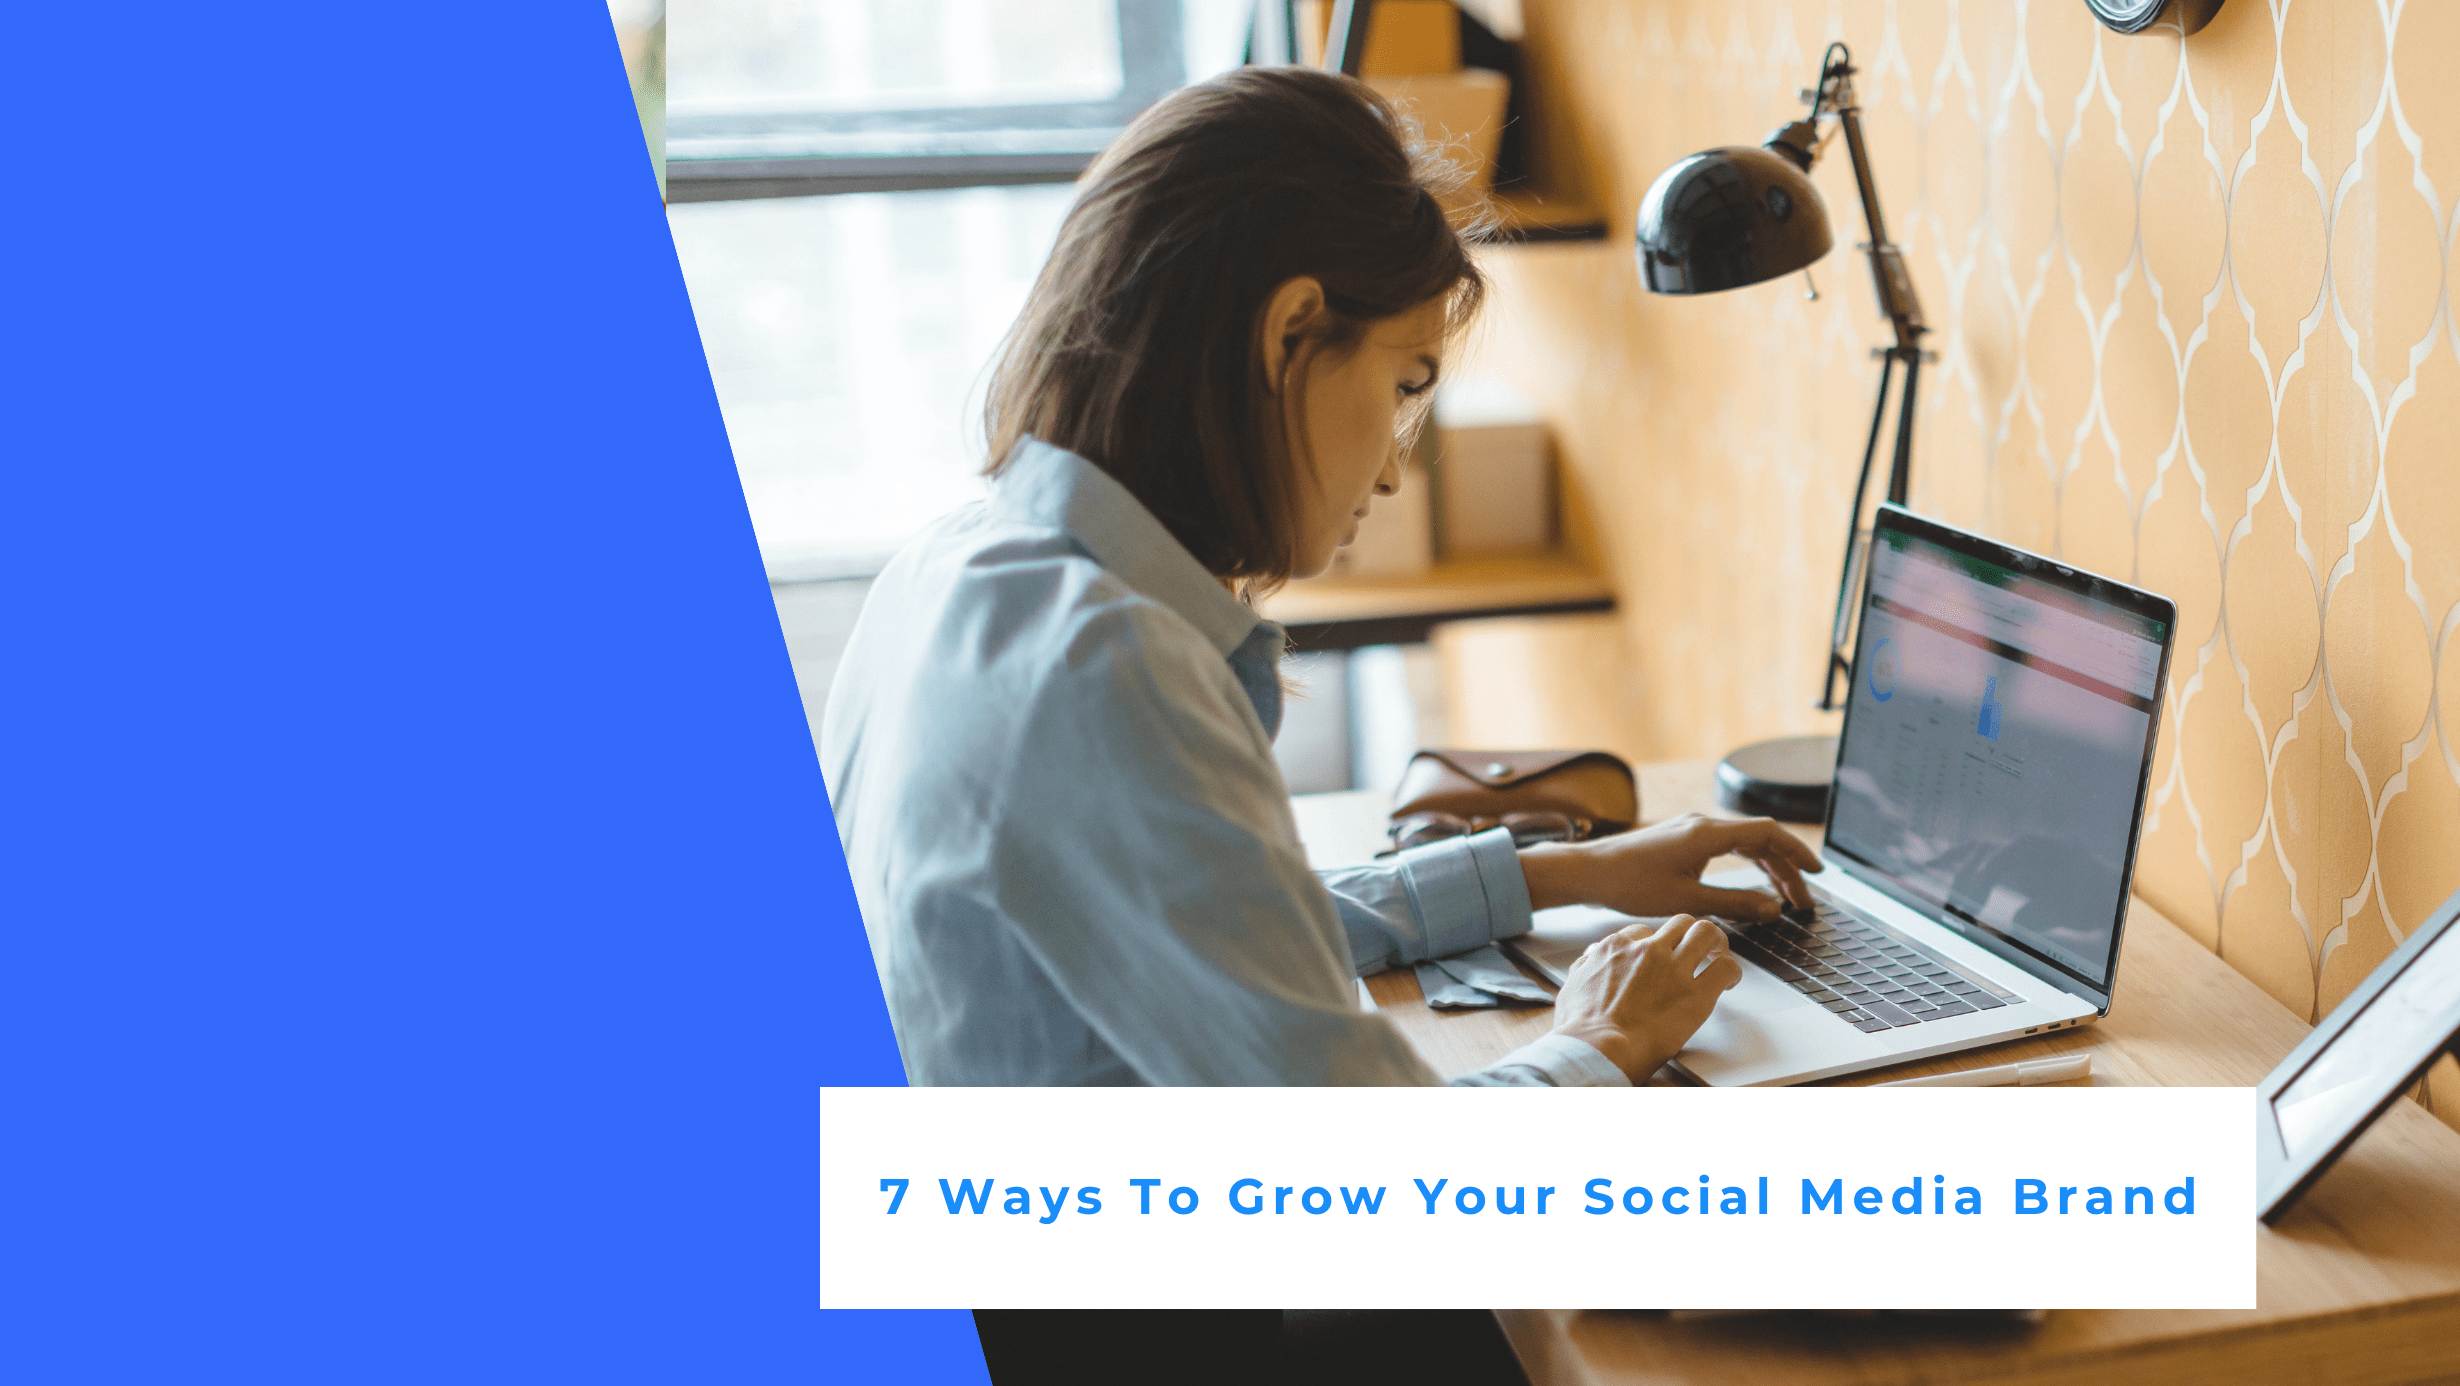 Social media manager applying the 7 ways to grow your social media brand